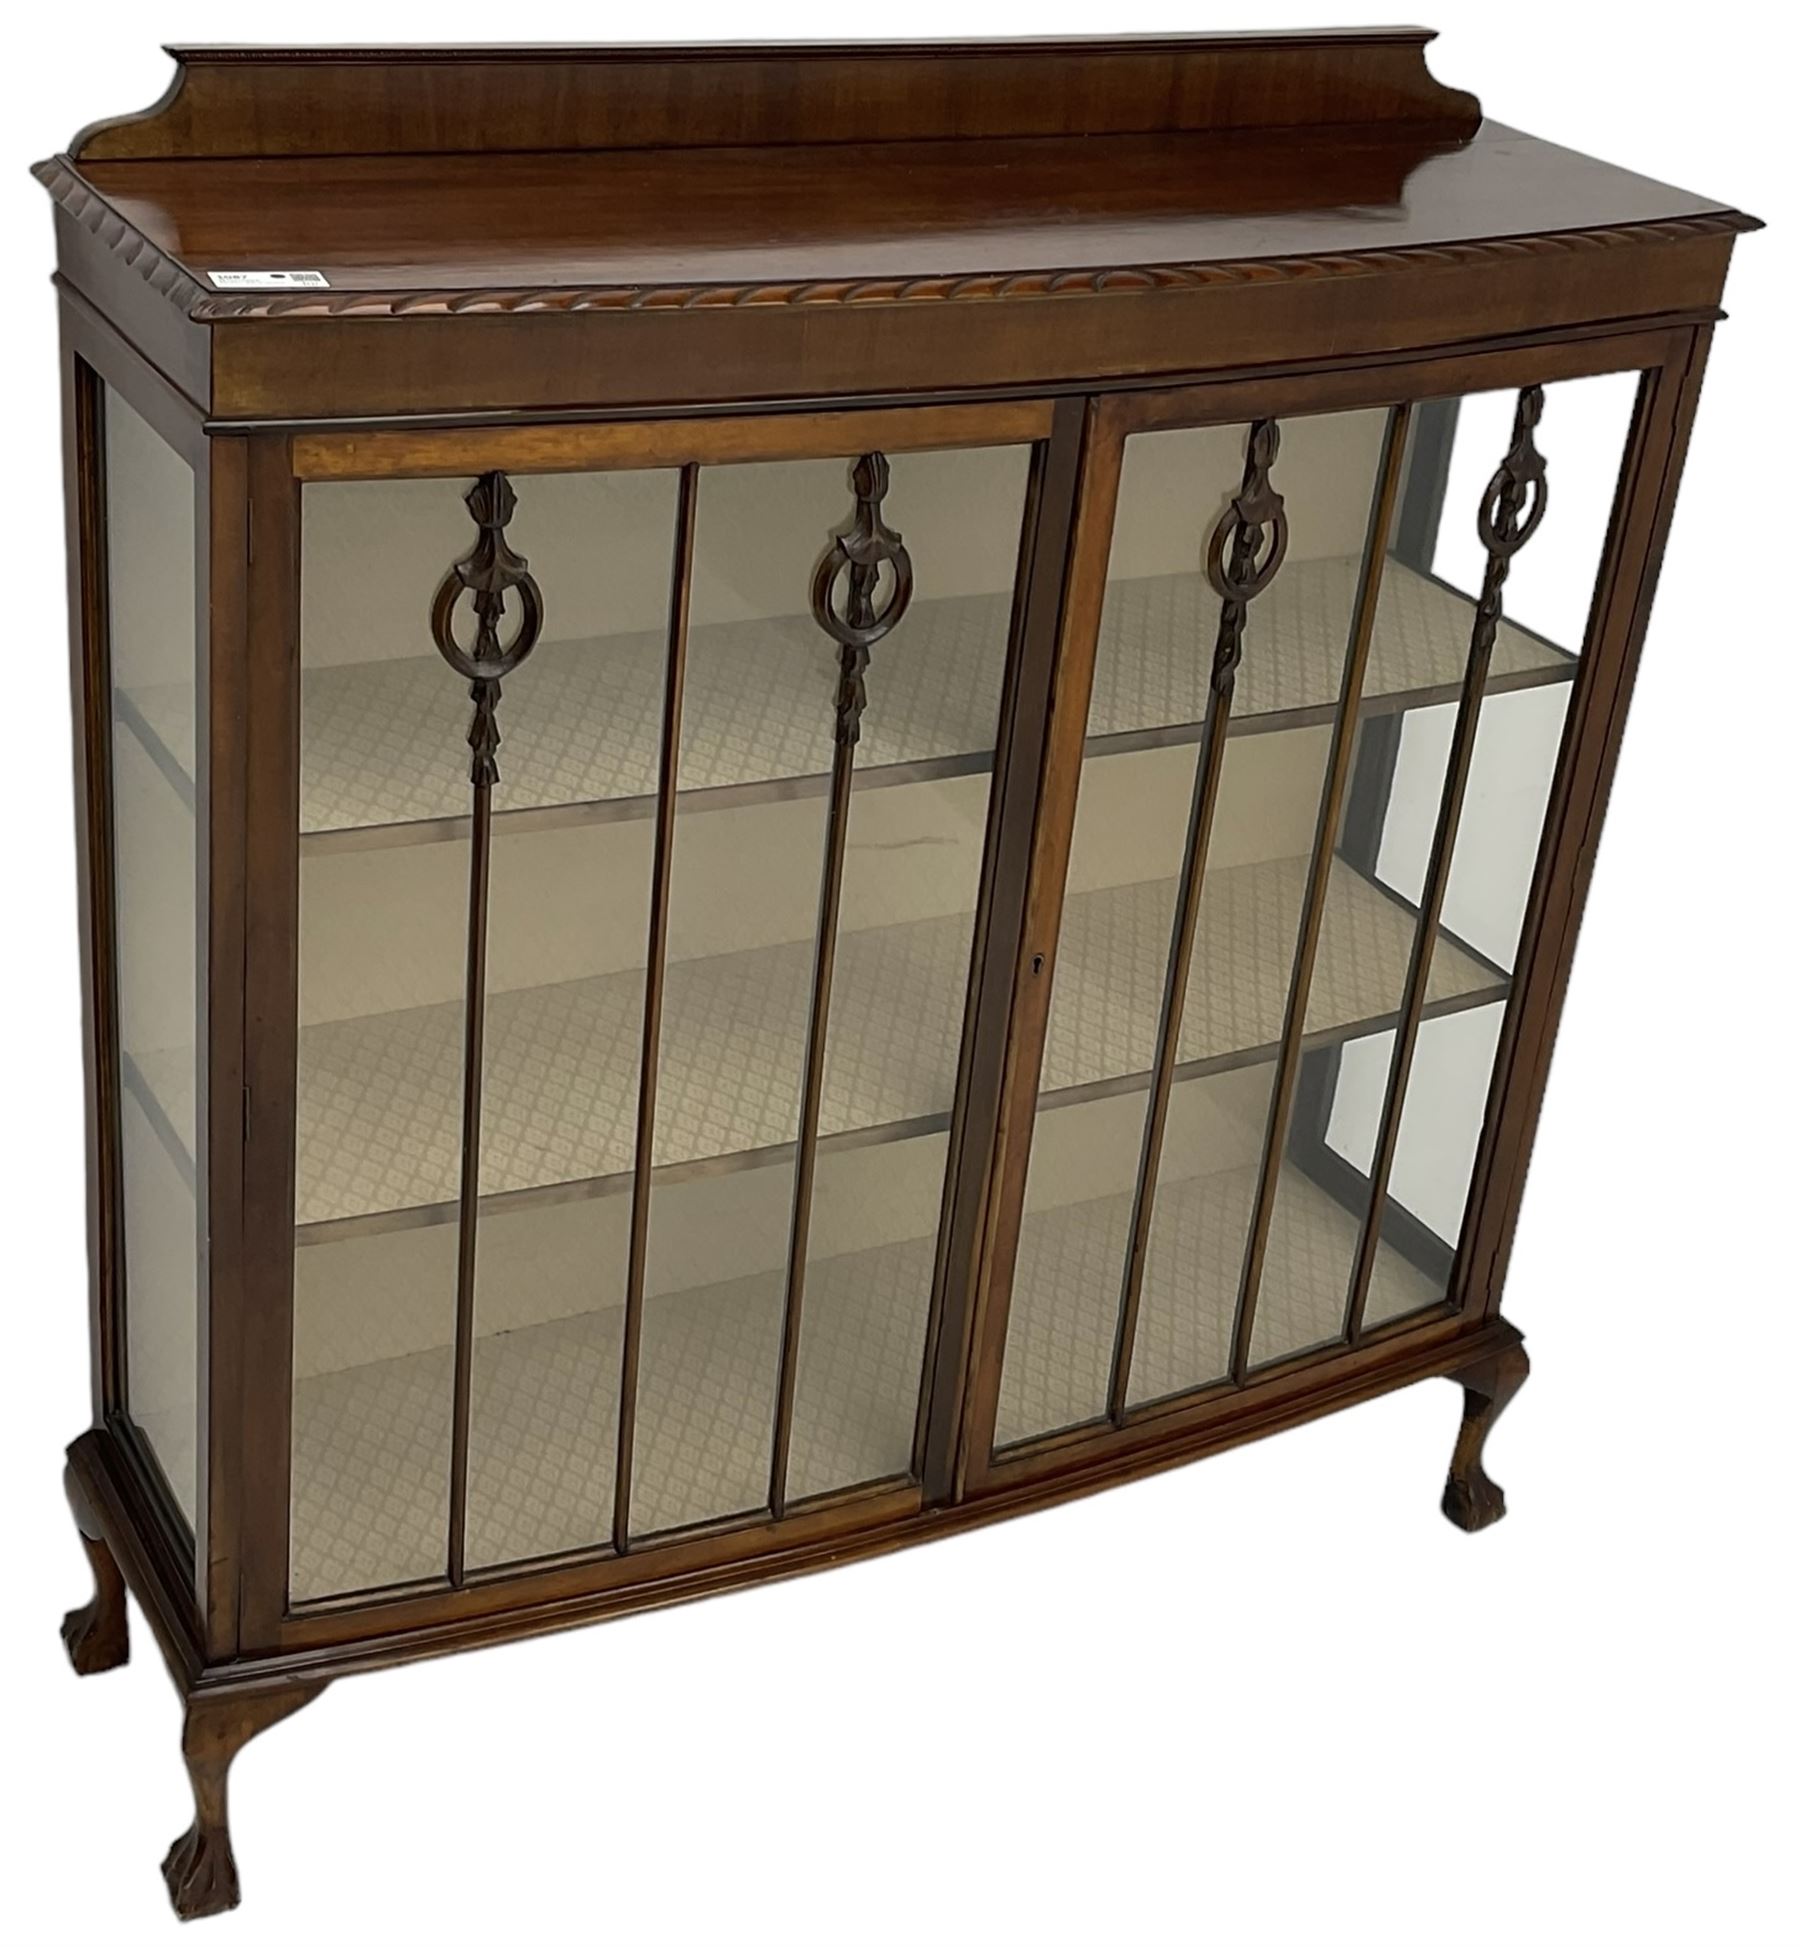 Early 20th century mahogany bow-front display cabinet - Image 2 of 6